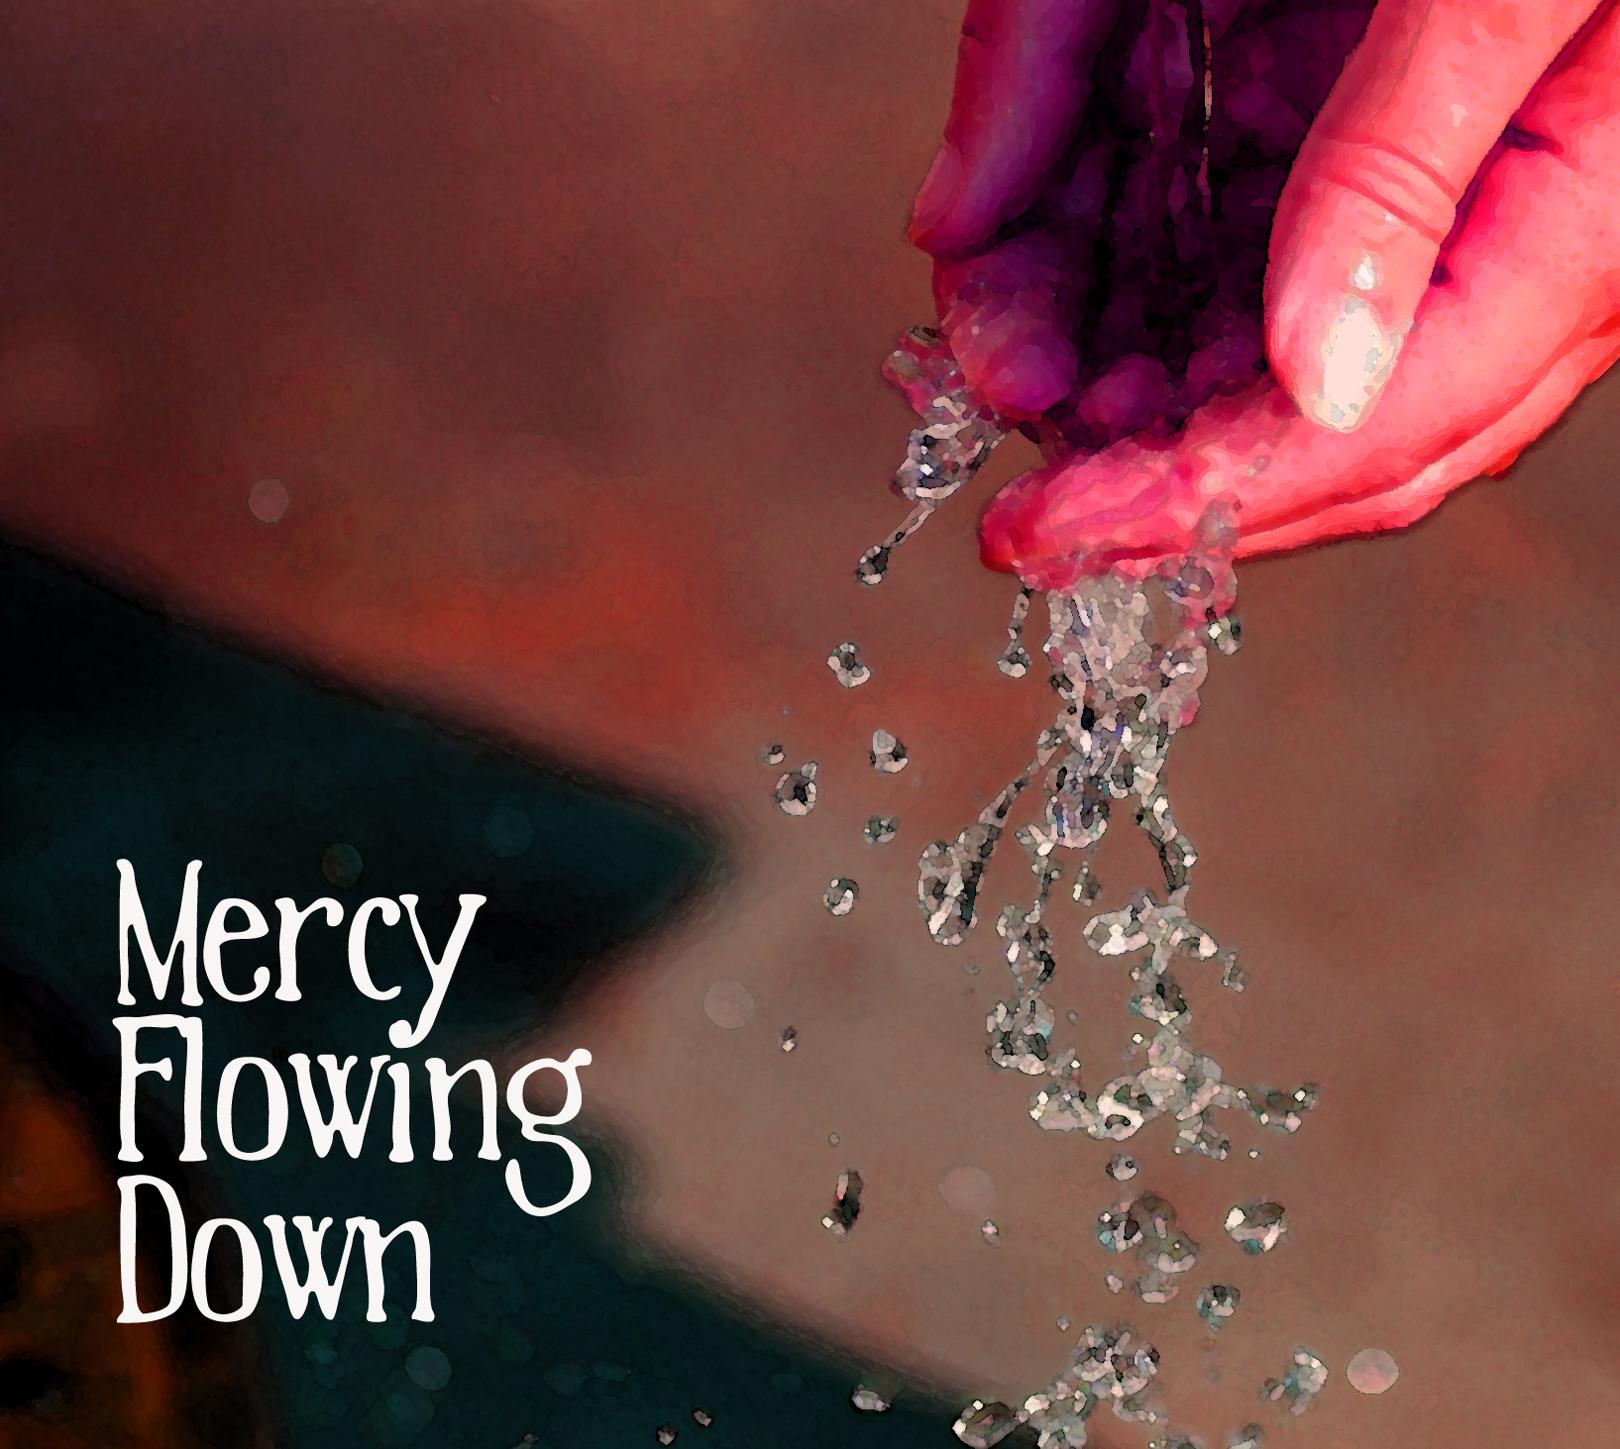 Mercy Flowing Down EP Cover